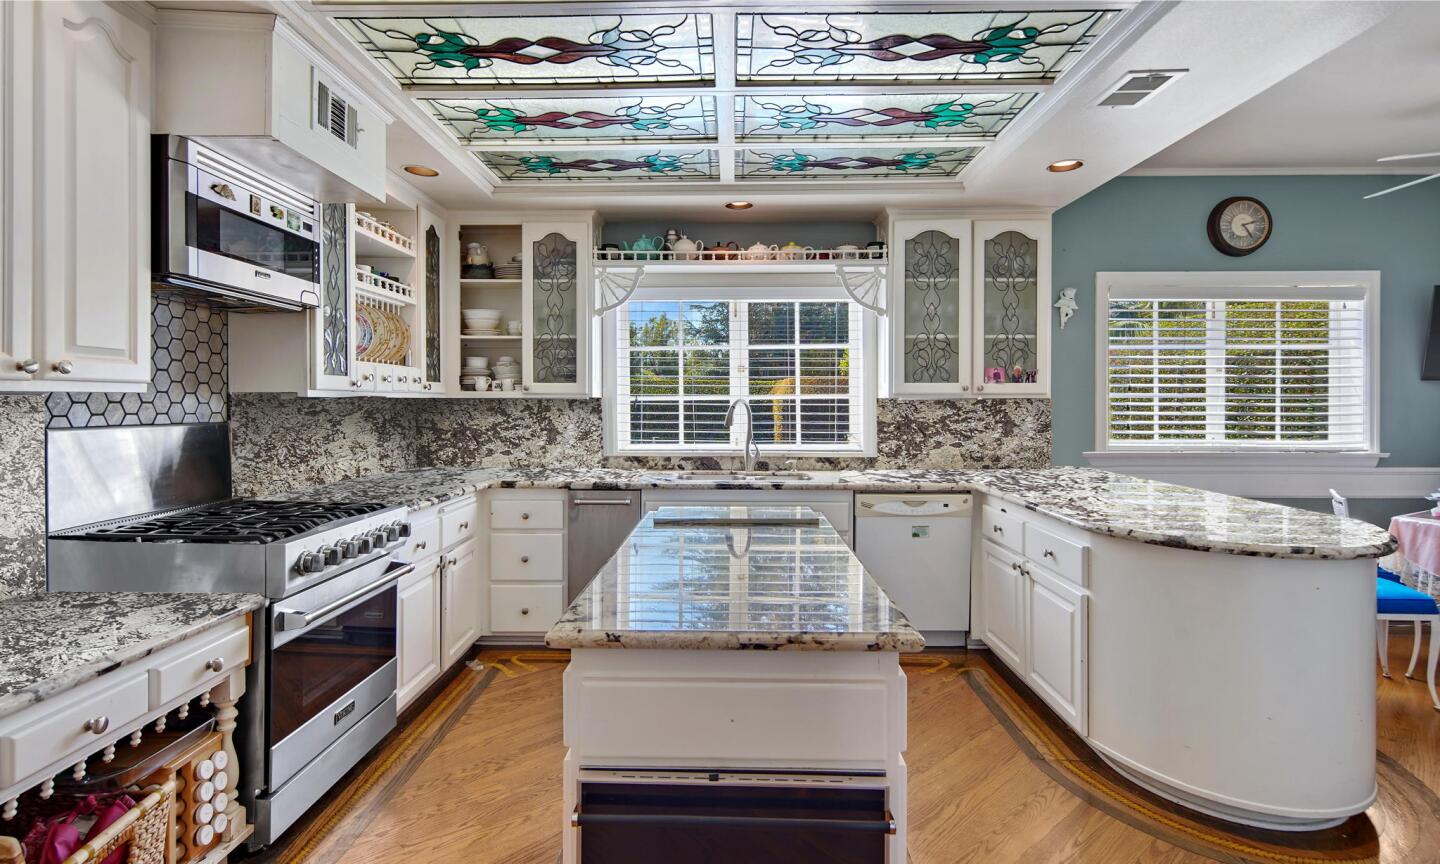 The kitchen has white cabinets and an island and wooden floor.